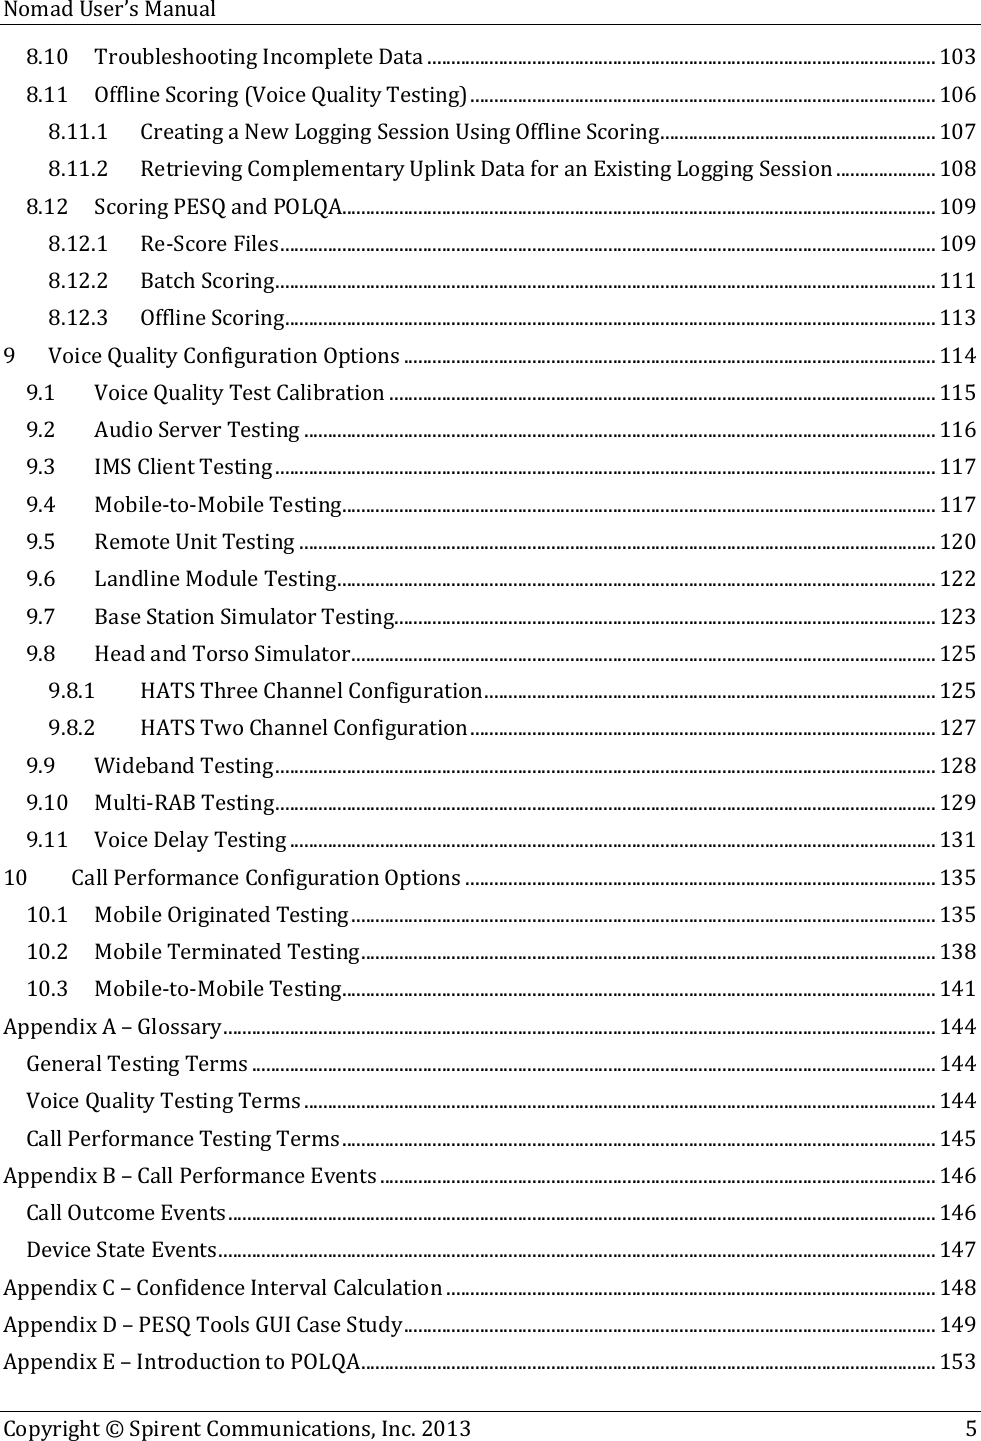  Nomad User’s Manual   Copyright © Spirent Communications, Inc. 2013    5  8.10 Troubleshooting Incomplete Data ........................................................................................................... 103 8.11 Offline Scoring (Voice Quality Testing) .................................................................................................. 106 8.11.1 Creating a New Logging Session Using Offline Scoring .......................................................... 107 8.11.2 Retrieving Complementary Uplink Data for an Existing Logging Session ..................... 108 8.12 Scoring PESQ and POLQA............................................................................................................................. 109 8.12.1 Re-Score Files .......................................................................................................................................... 109 8.12.2 Batch Scoring ........................................................................................................................................... 111 8.12.3 Offline Scoring ......................................................................................................................................... 113 9 Voice Quality Configuration Options ................................................................................................................ 114 9.1 Voice Quality Test Calibration ................................................................................................................... 115 9.2 Audio Server Testing ..................................................................................................................................... 116 9.3 IMS Client Testing ........................................................................................................................................... 117 9.4 Mobile-to-Mobile Testing ............................................................................................................................. 117 9.5 Remote Unit Testing ...................................................................................................................................... 120 9.6 Landline Module Testing .............................................................................................................................. 122 9.7 Base Station Simulator Testing.................................................................................................................. 123 9.8 Head and Torso Simulator ........................................................................................................................... 125 9.8.1 HATS Three Channel Configuration ............................................................................................... 125 9.8.2 HATS Two Channel Configuration .................................................................................................. 127 9.9 Wideband Testing ........................................................................................................................................... 128 9.10 Multi-RAB Testing ........................................................................................................................................... 129 9.11 Voice Delay Testing ........................................................................................................................................ 131 10 Call Performance Configuration Options ................................................................................................... 135 10.1 Mobile Originated Testing ........................................................................................................................... 135 10.2 Mobile Terminated Testing ......................................................................................................................... 138 10.3 Mobile-to-Mobile Testing ............................................................................................................................. 141 Appendix A – Glossary ...................................................................................................................................................... 144 General Testing Terms ................................................................................................................................................ 144 Voice Quality Testing Terms ..................................................................................................................................... 144 Call Performance Testing Terms ............................................................................................................................. 145 Appendix B – Call Performance Events ..................................................................................................................... 146 Call Outcome Events ..................................................................................................................................................... 146 Device State Events ....................................................................................................................................................... 147 Appendix C – Confidence Interval Calculation ....................................................................................................... 148 Appendix D – PESQ Tools GUI Case Study ................................................................................................................ 149 Appendix E – Introduction to POLQA ......................................................................................................................... 153 